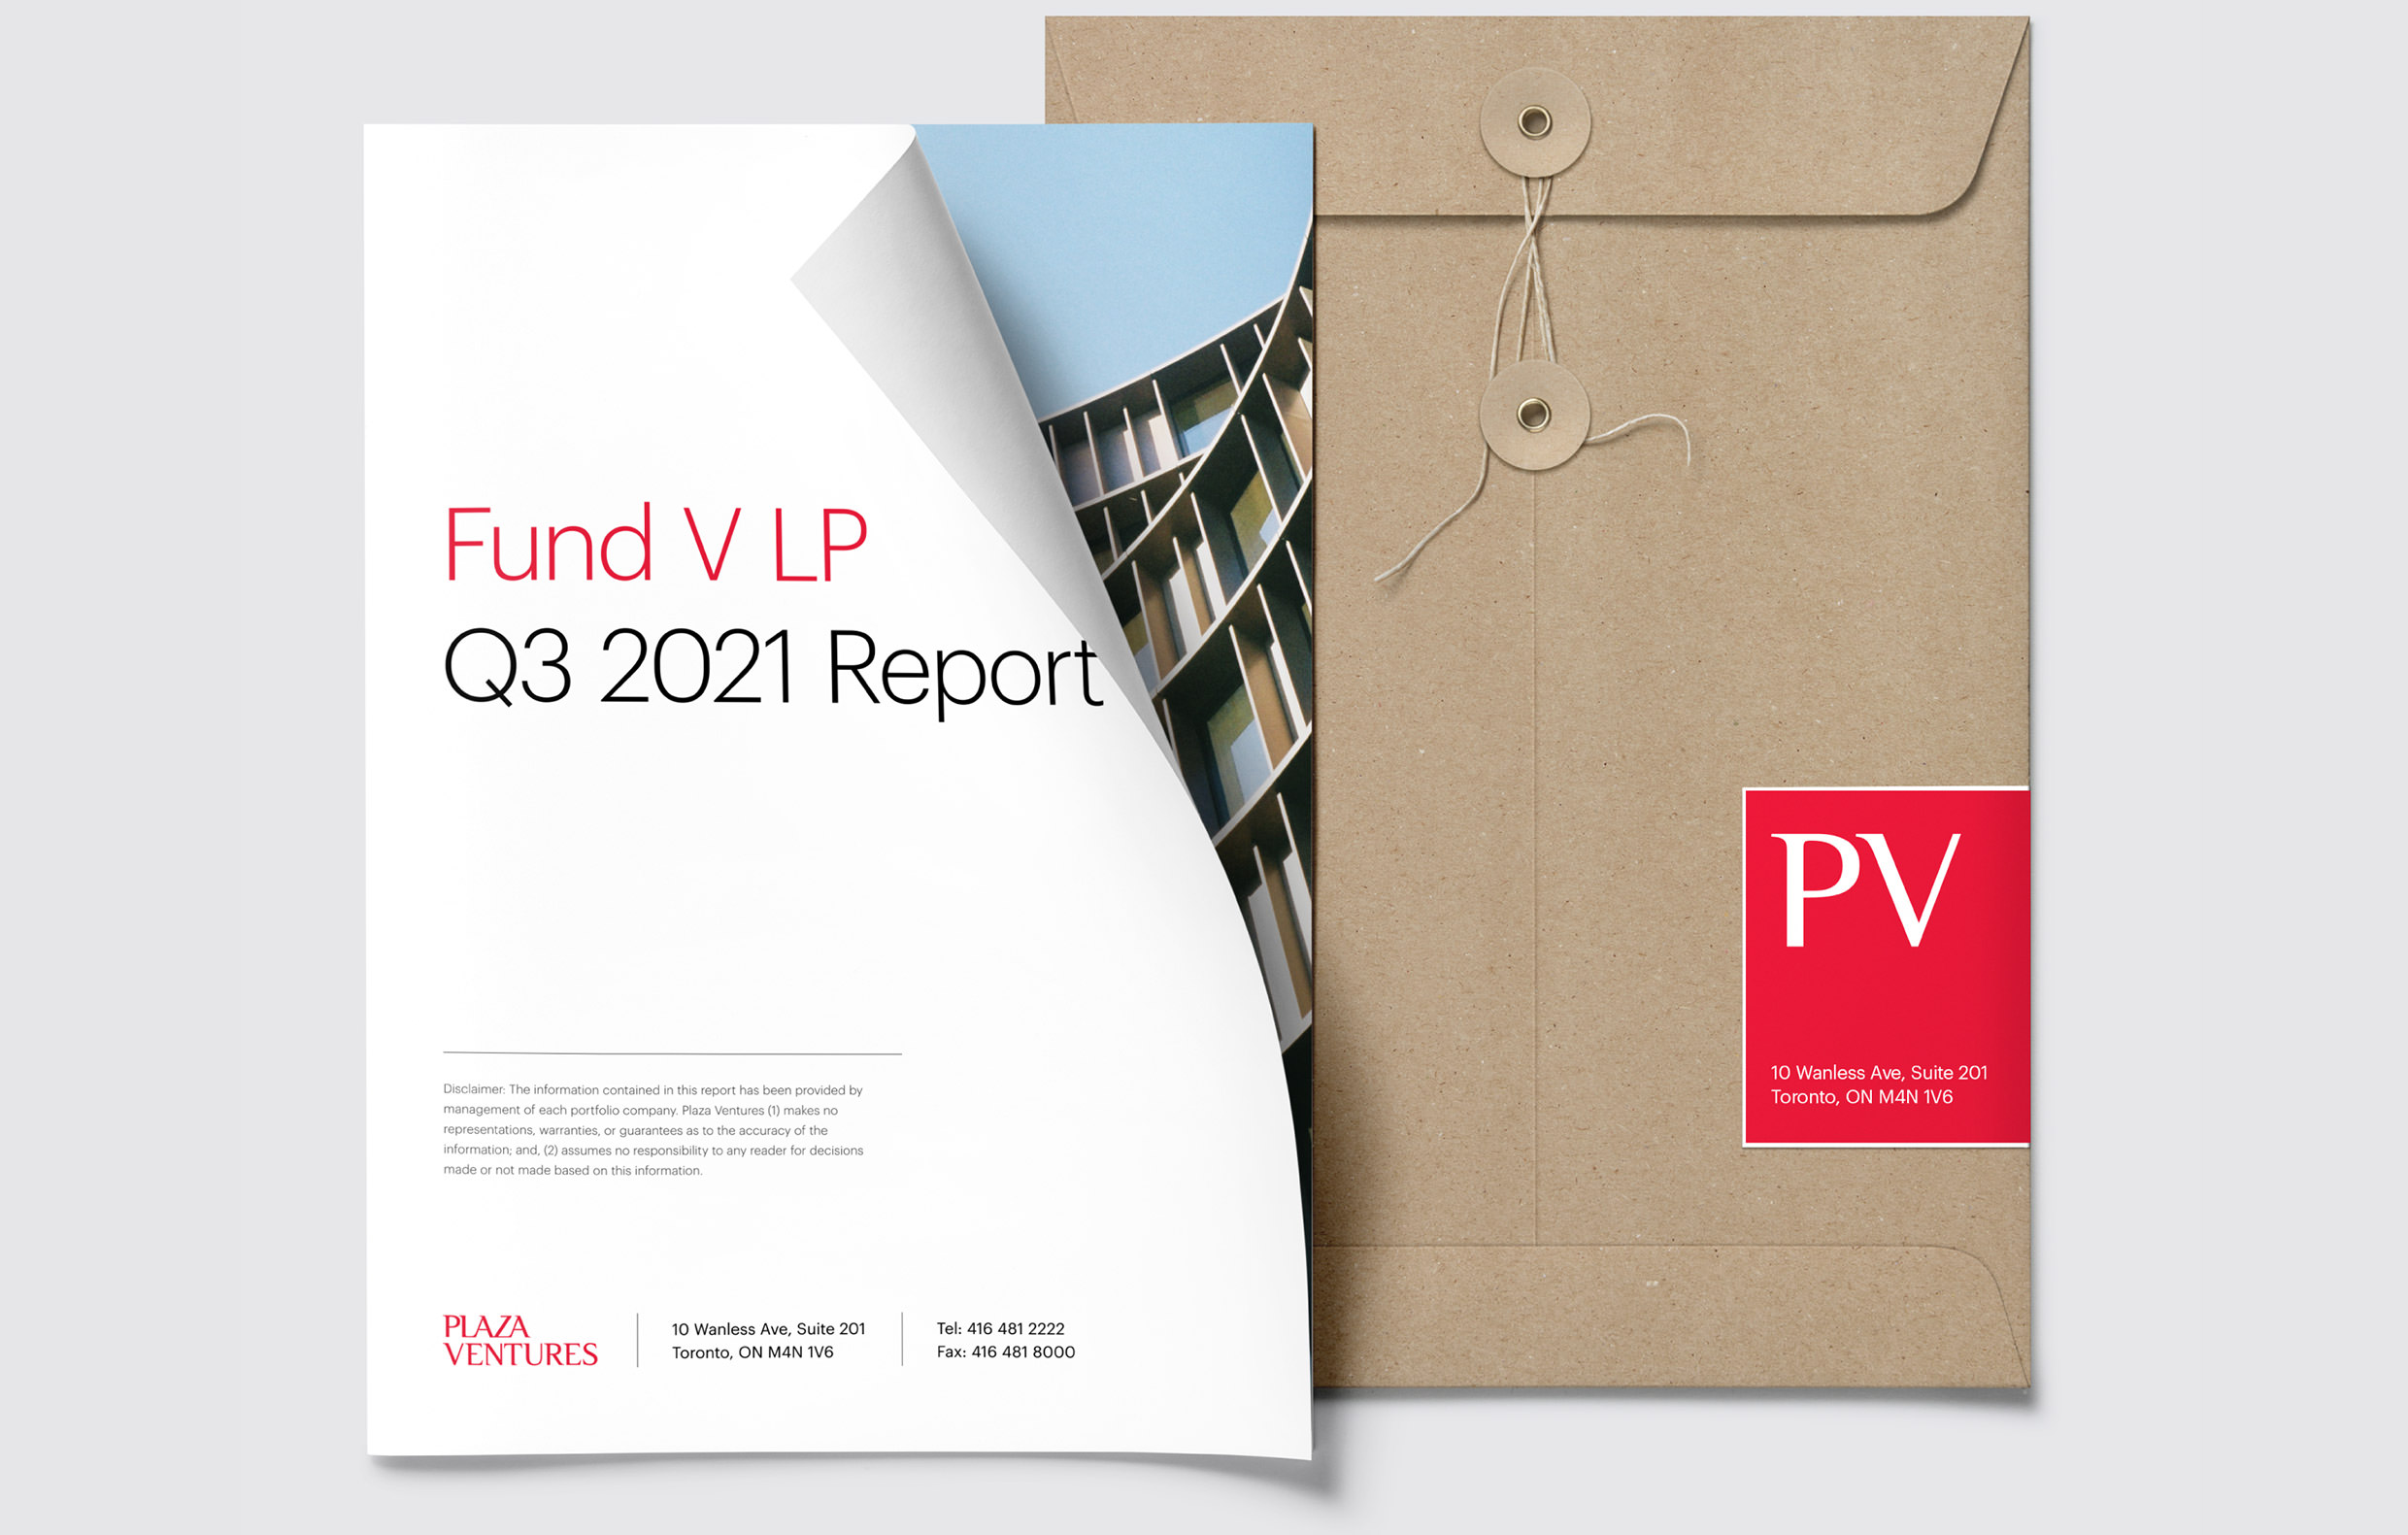 Example print collateral design exploration for a quarterly PV Fund report